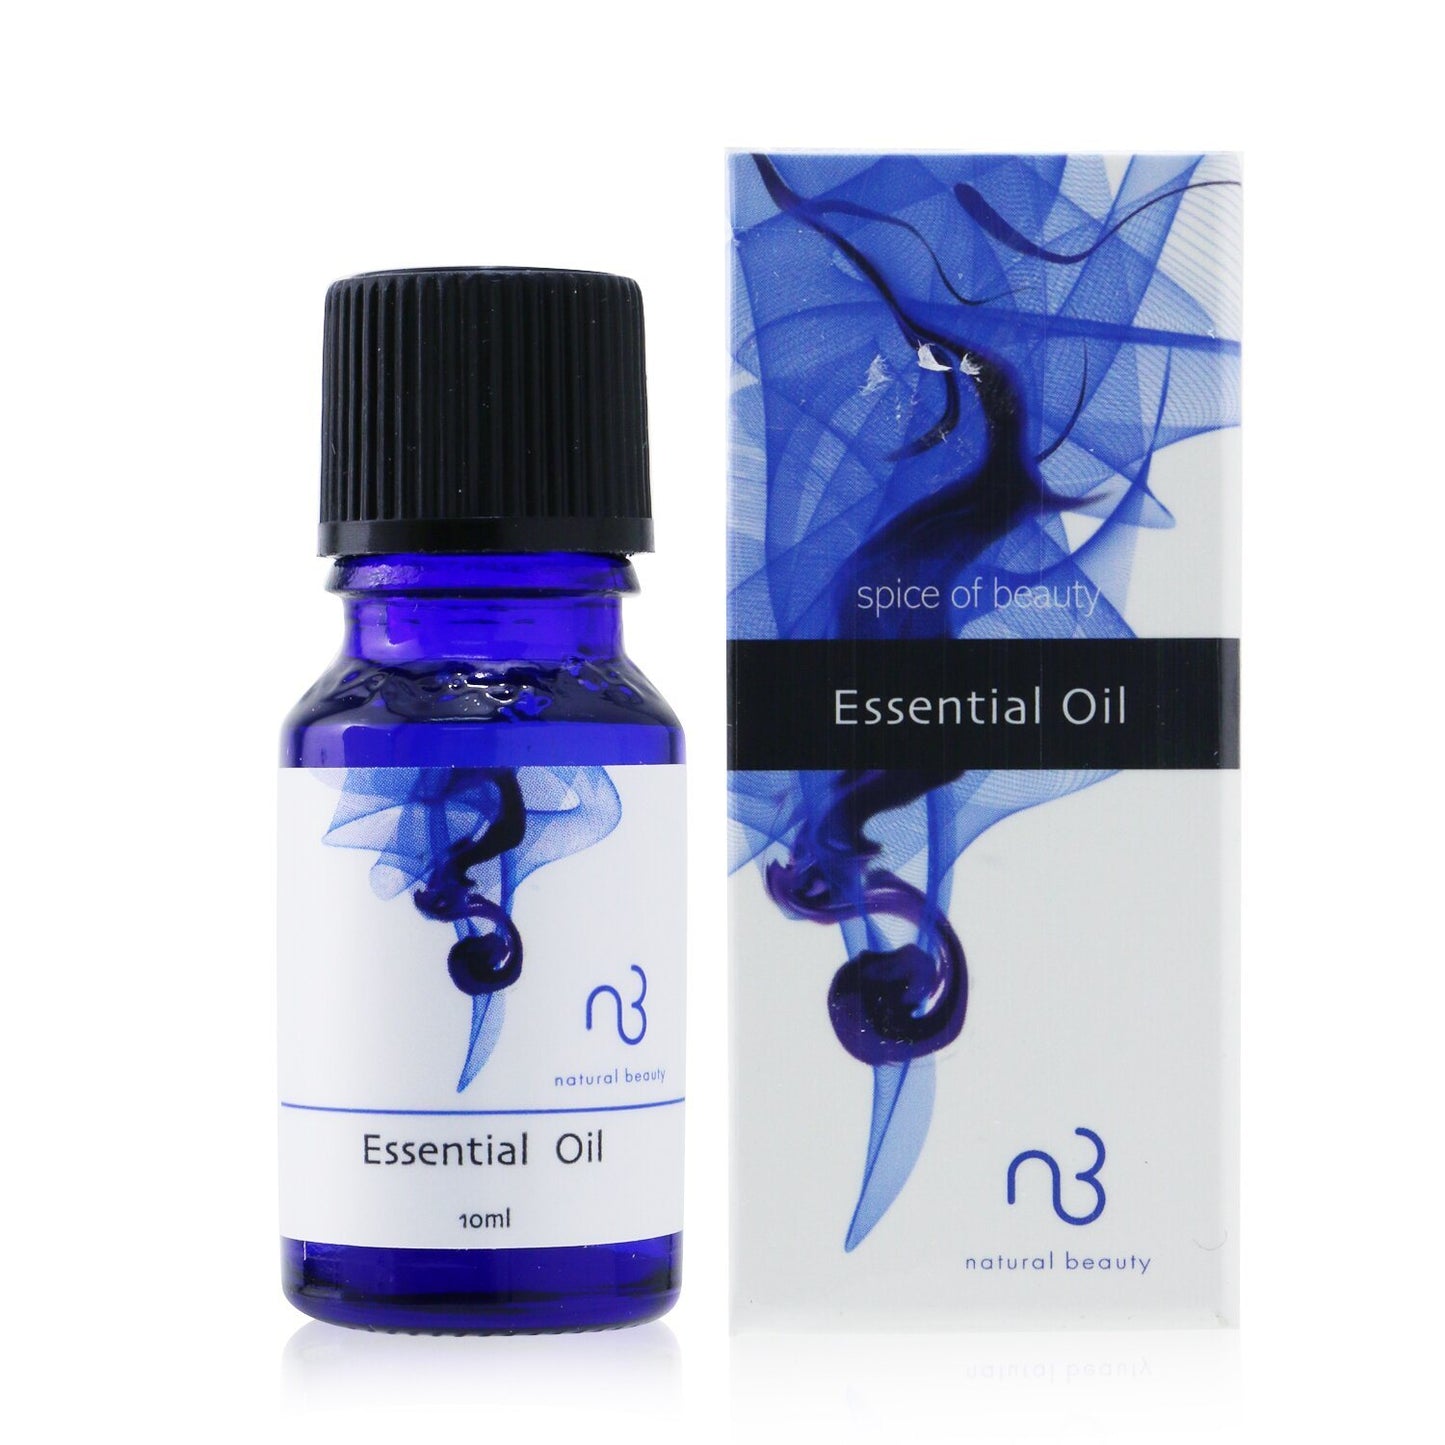 NATURAL BEAUTY - Spice Of Beauty Essential Oil - NB Rejuvenating Face Essential Oil 8W1509 10ml/0.3oz - lolaluxeshop